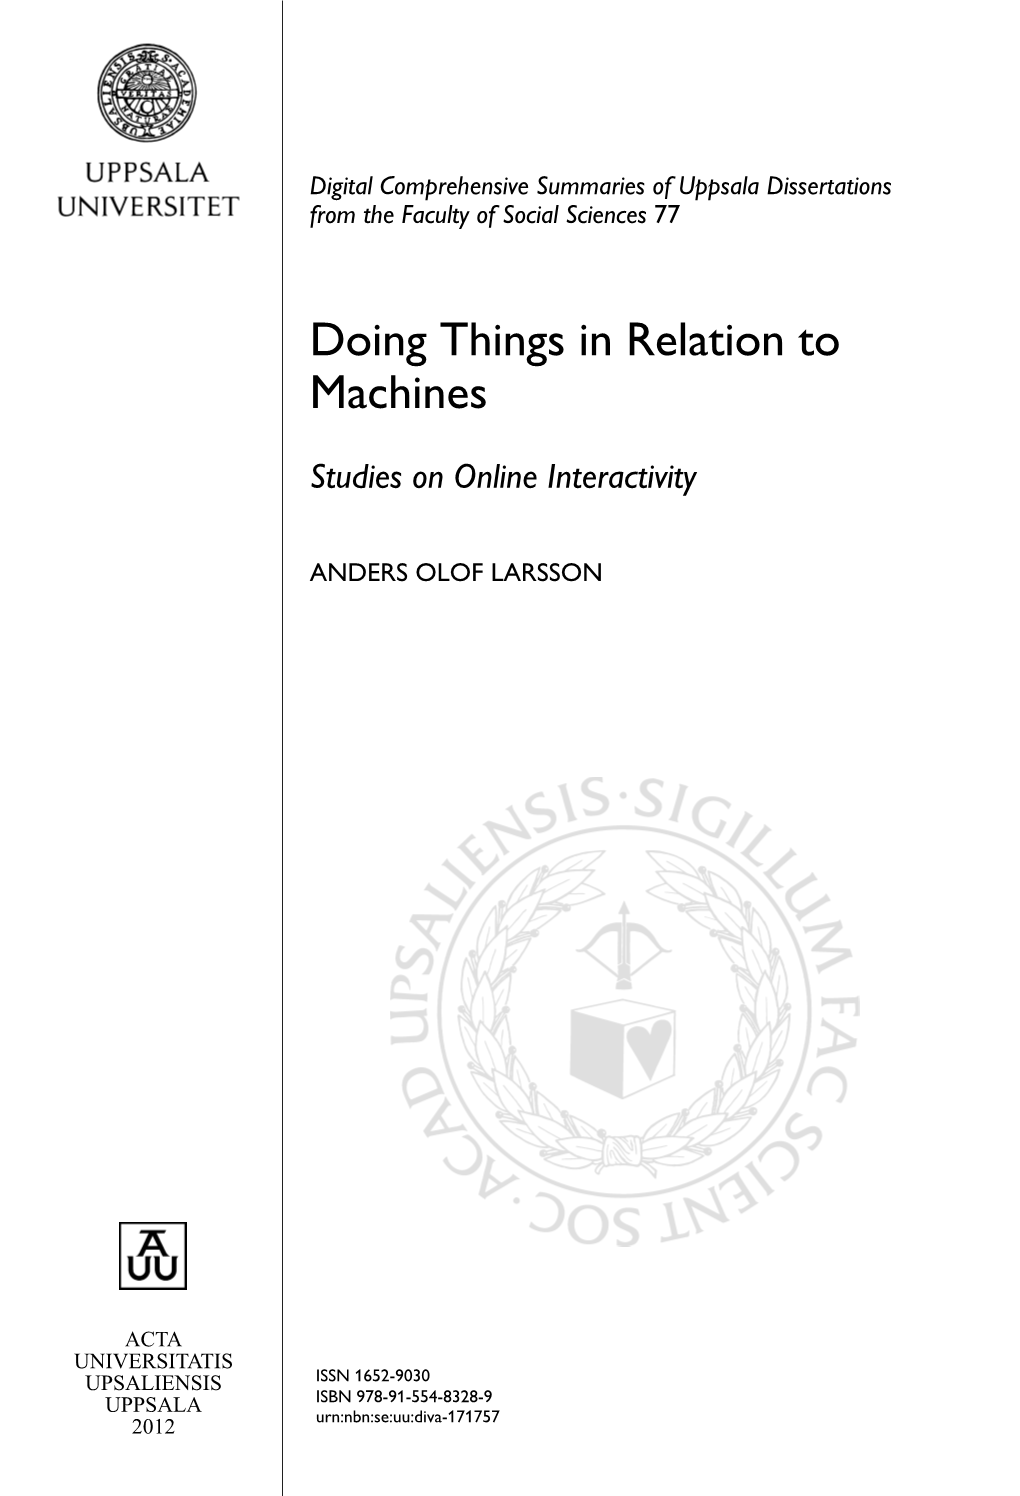 Doing Things in Relation to Machines